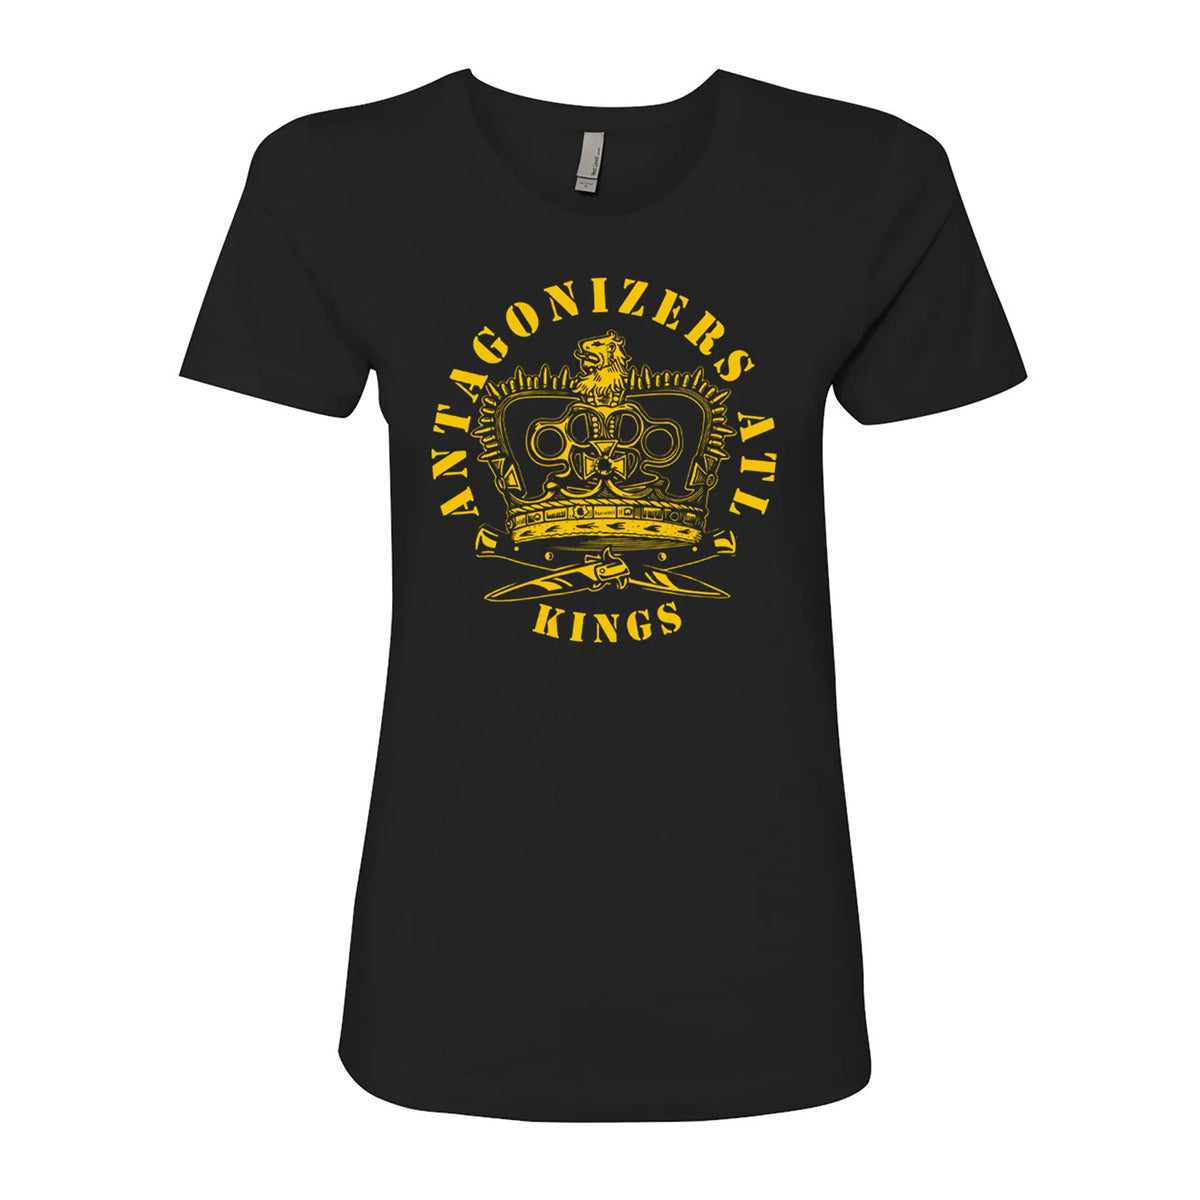 Antagonizers ATL - Kings Black Fitted T-Shirt